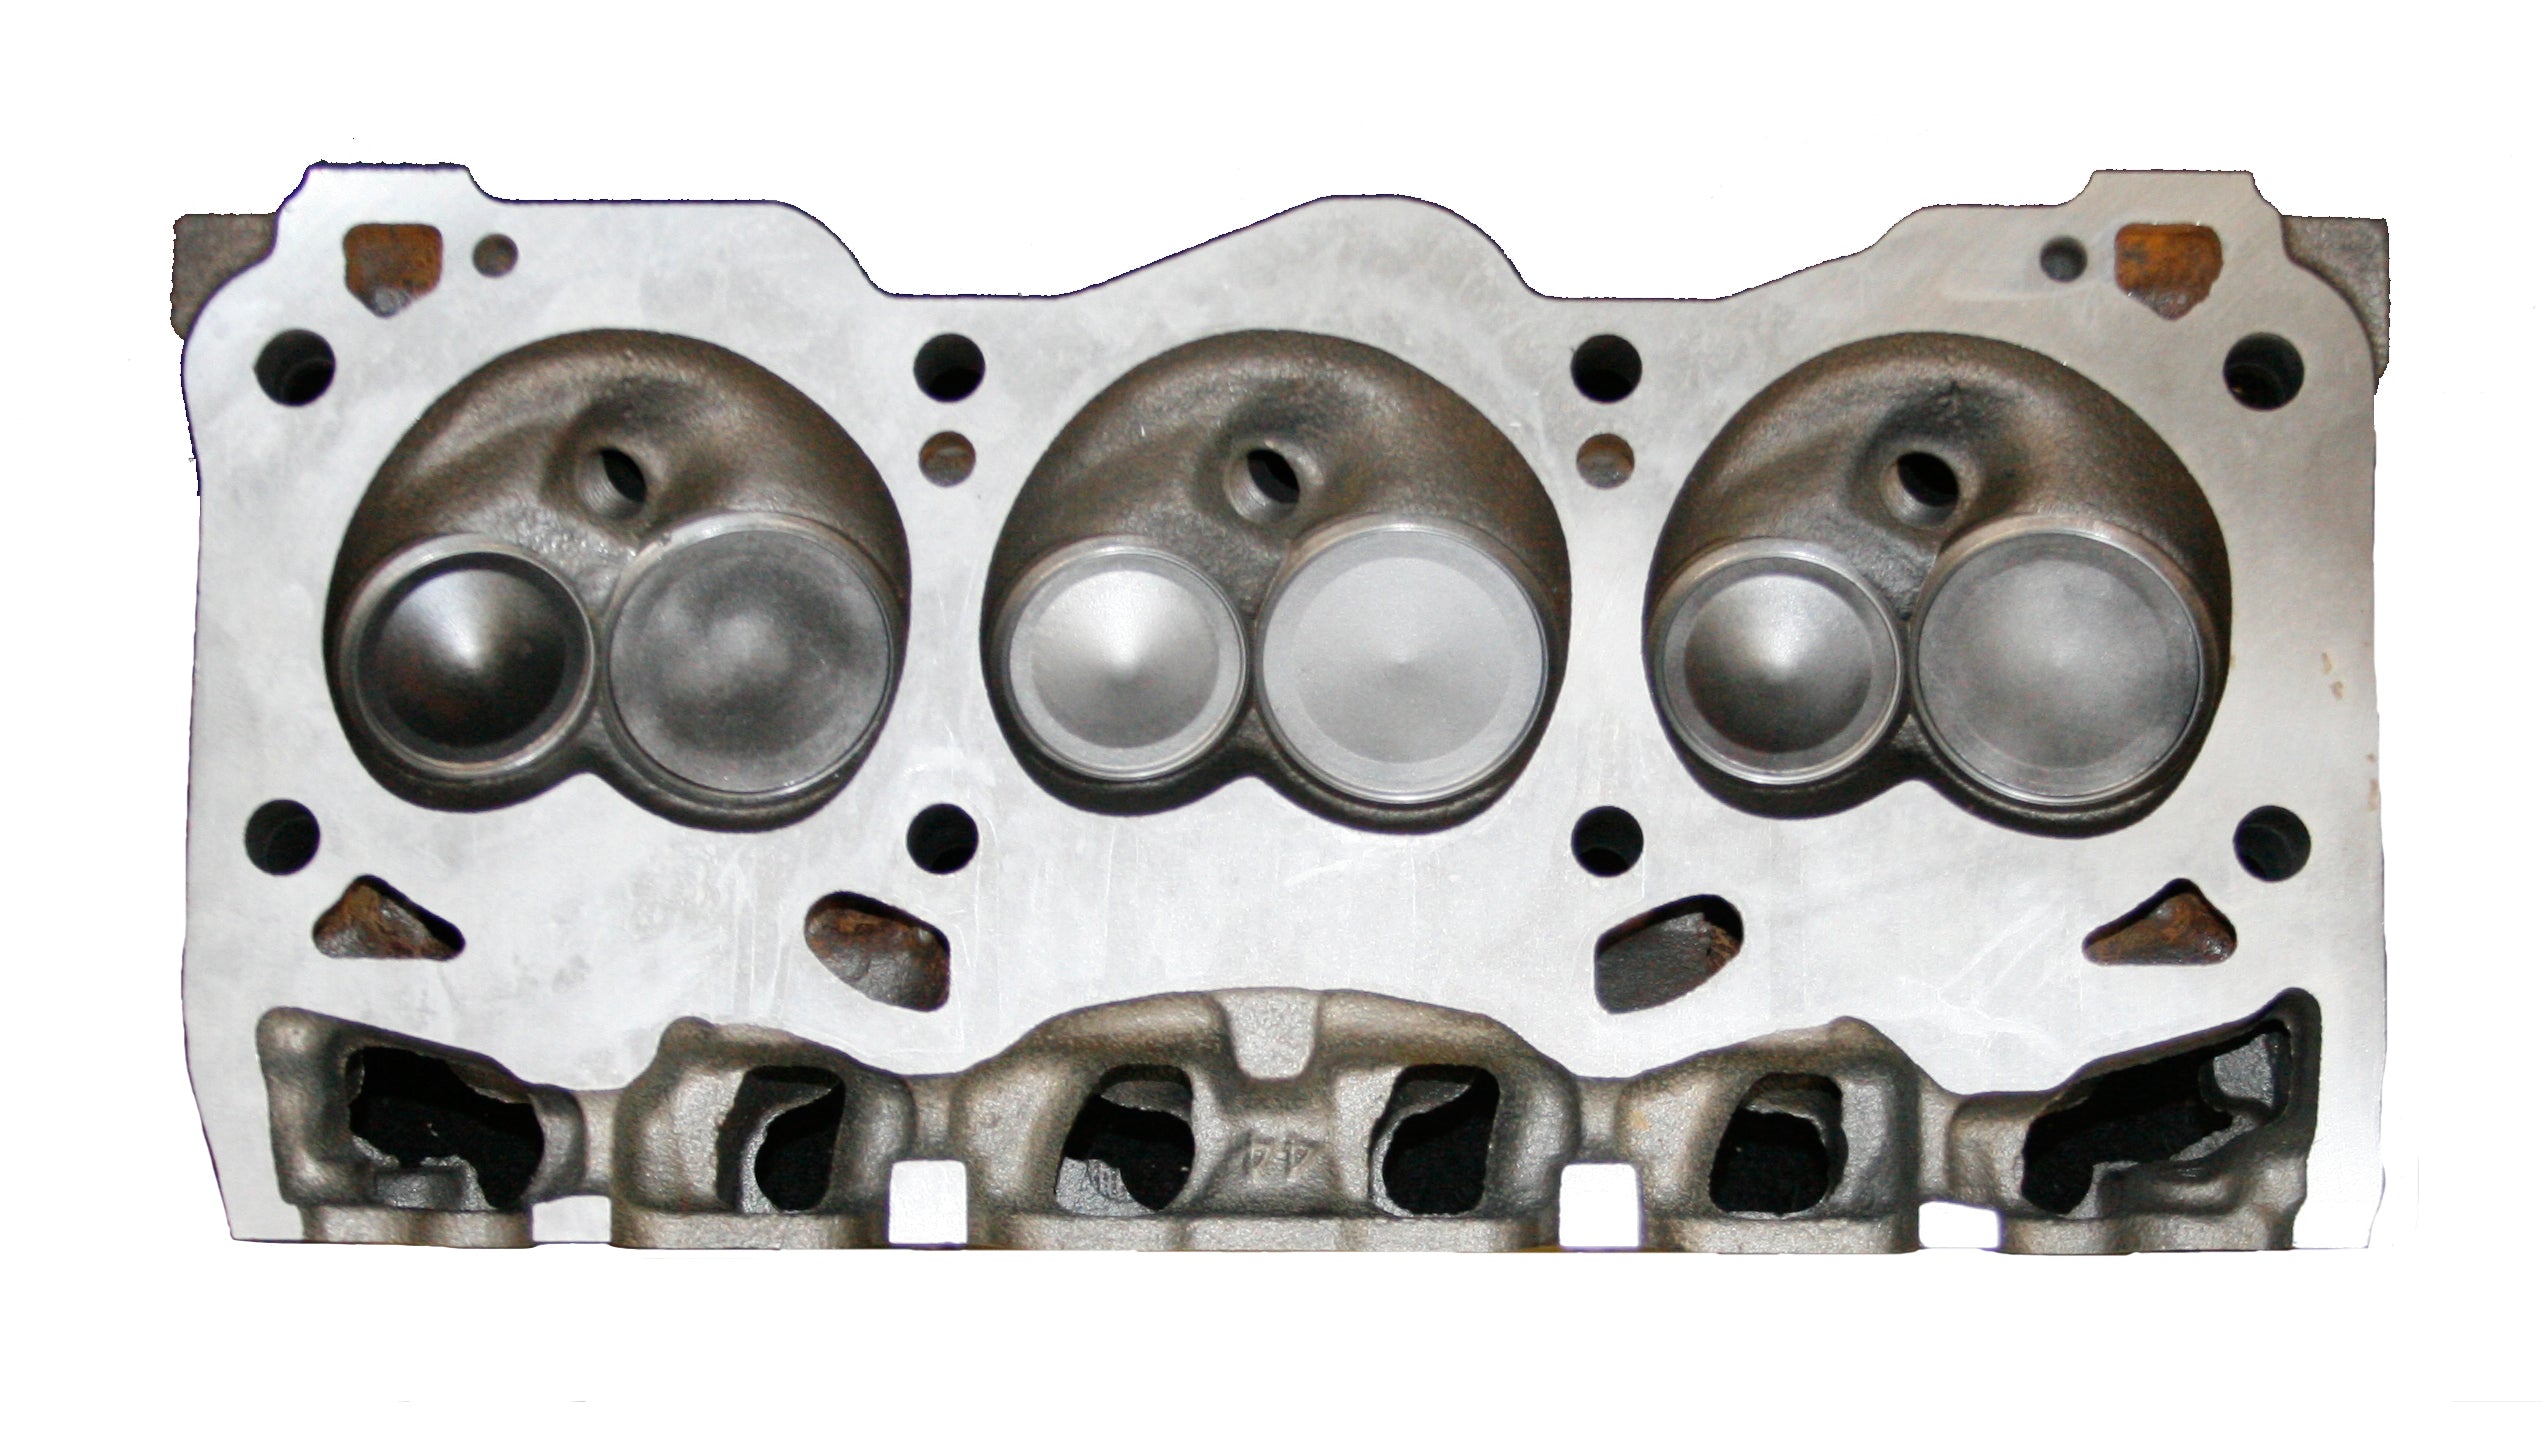 1995-2001 Buick Chevy Non Supercharged V6 3.8L Cylinder head casting # 134